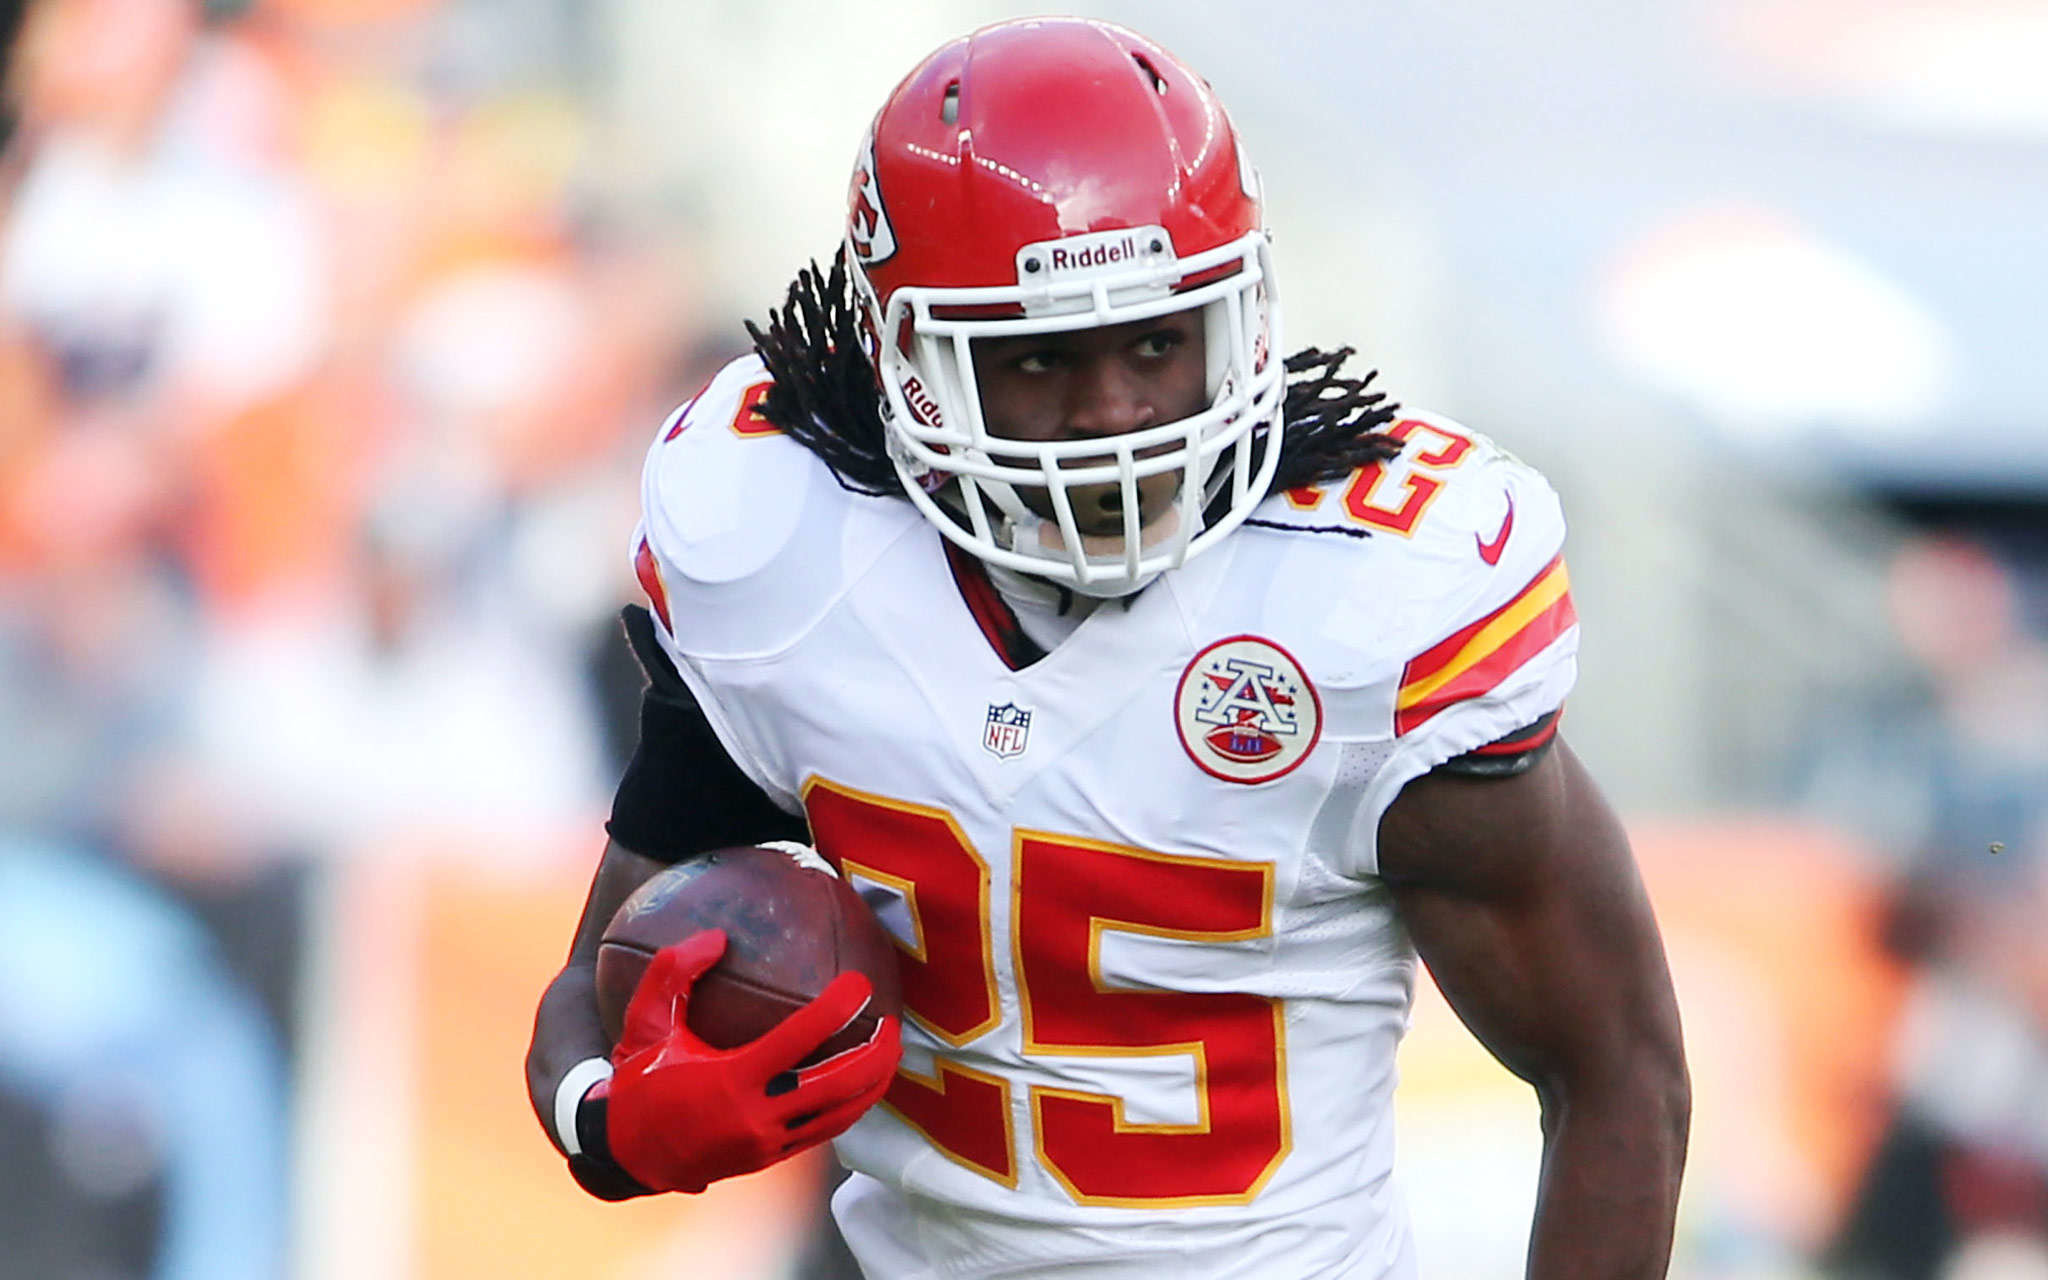 Jamaal charles wallpapers high quality download free